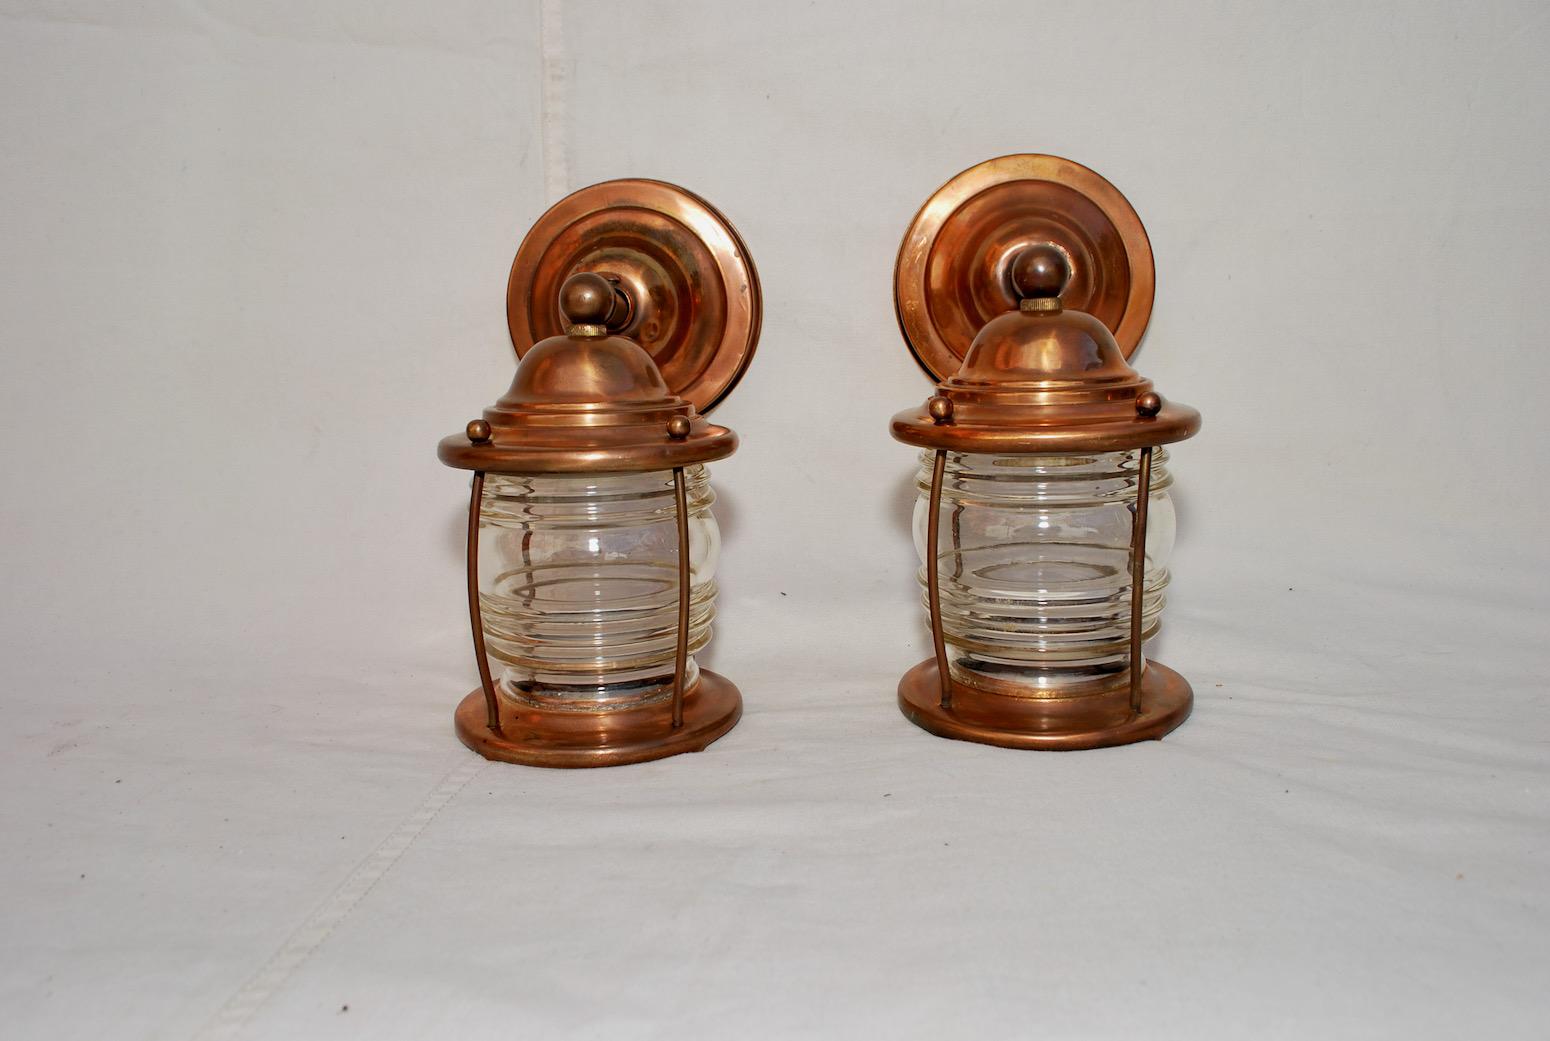 A very nice and cute pair of copper outdoor sconces.